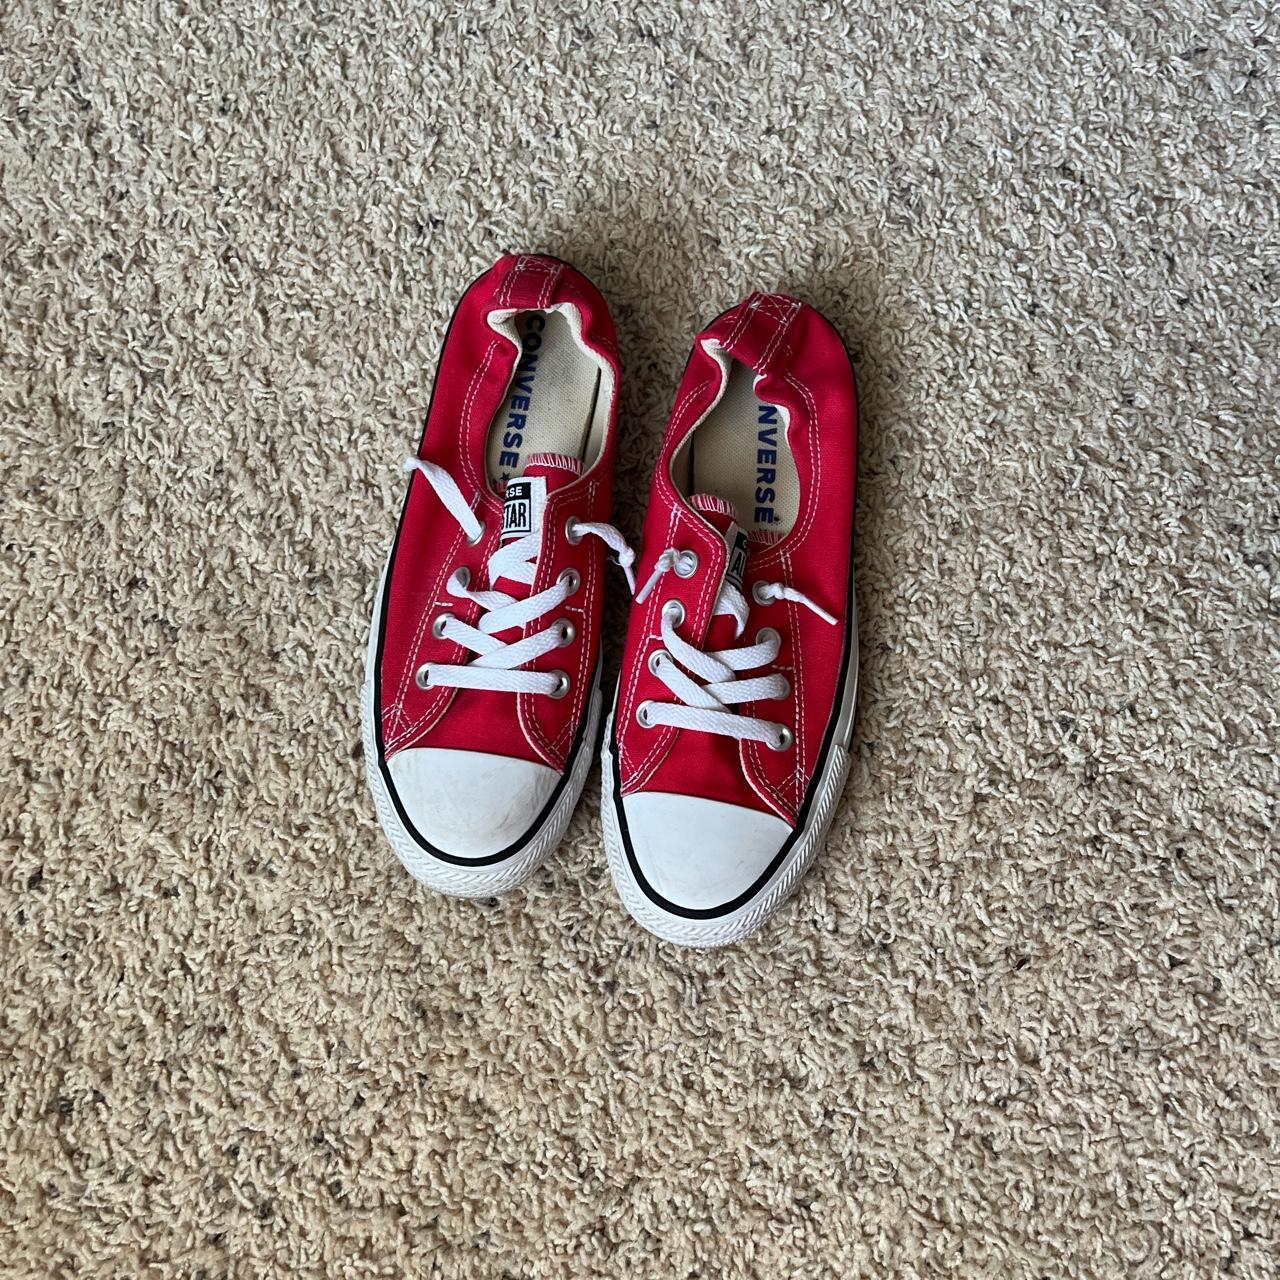 Red low top converse, probably worn once. - Depop